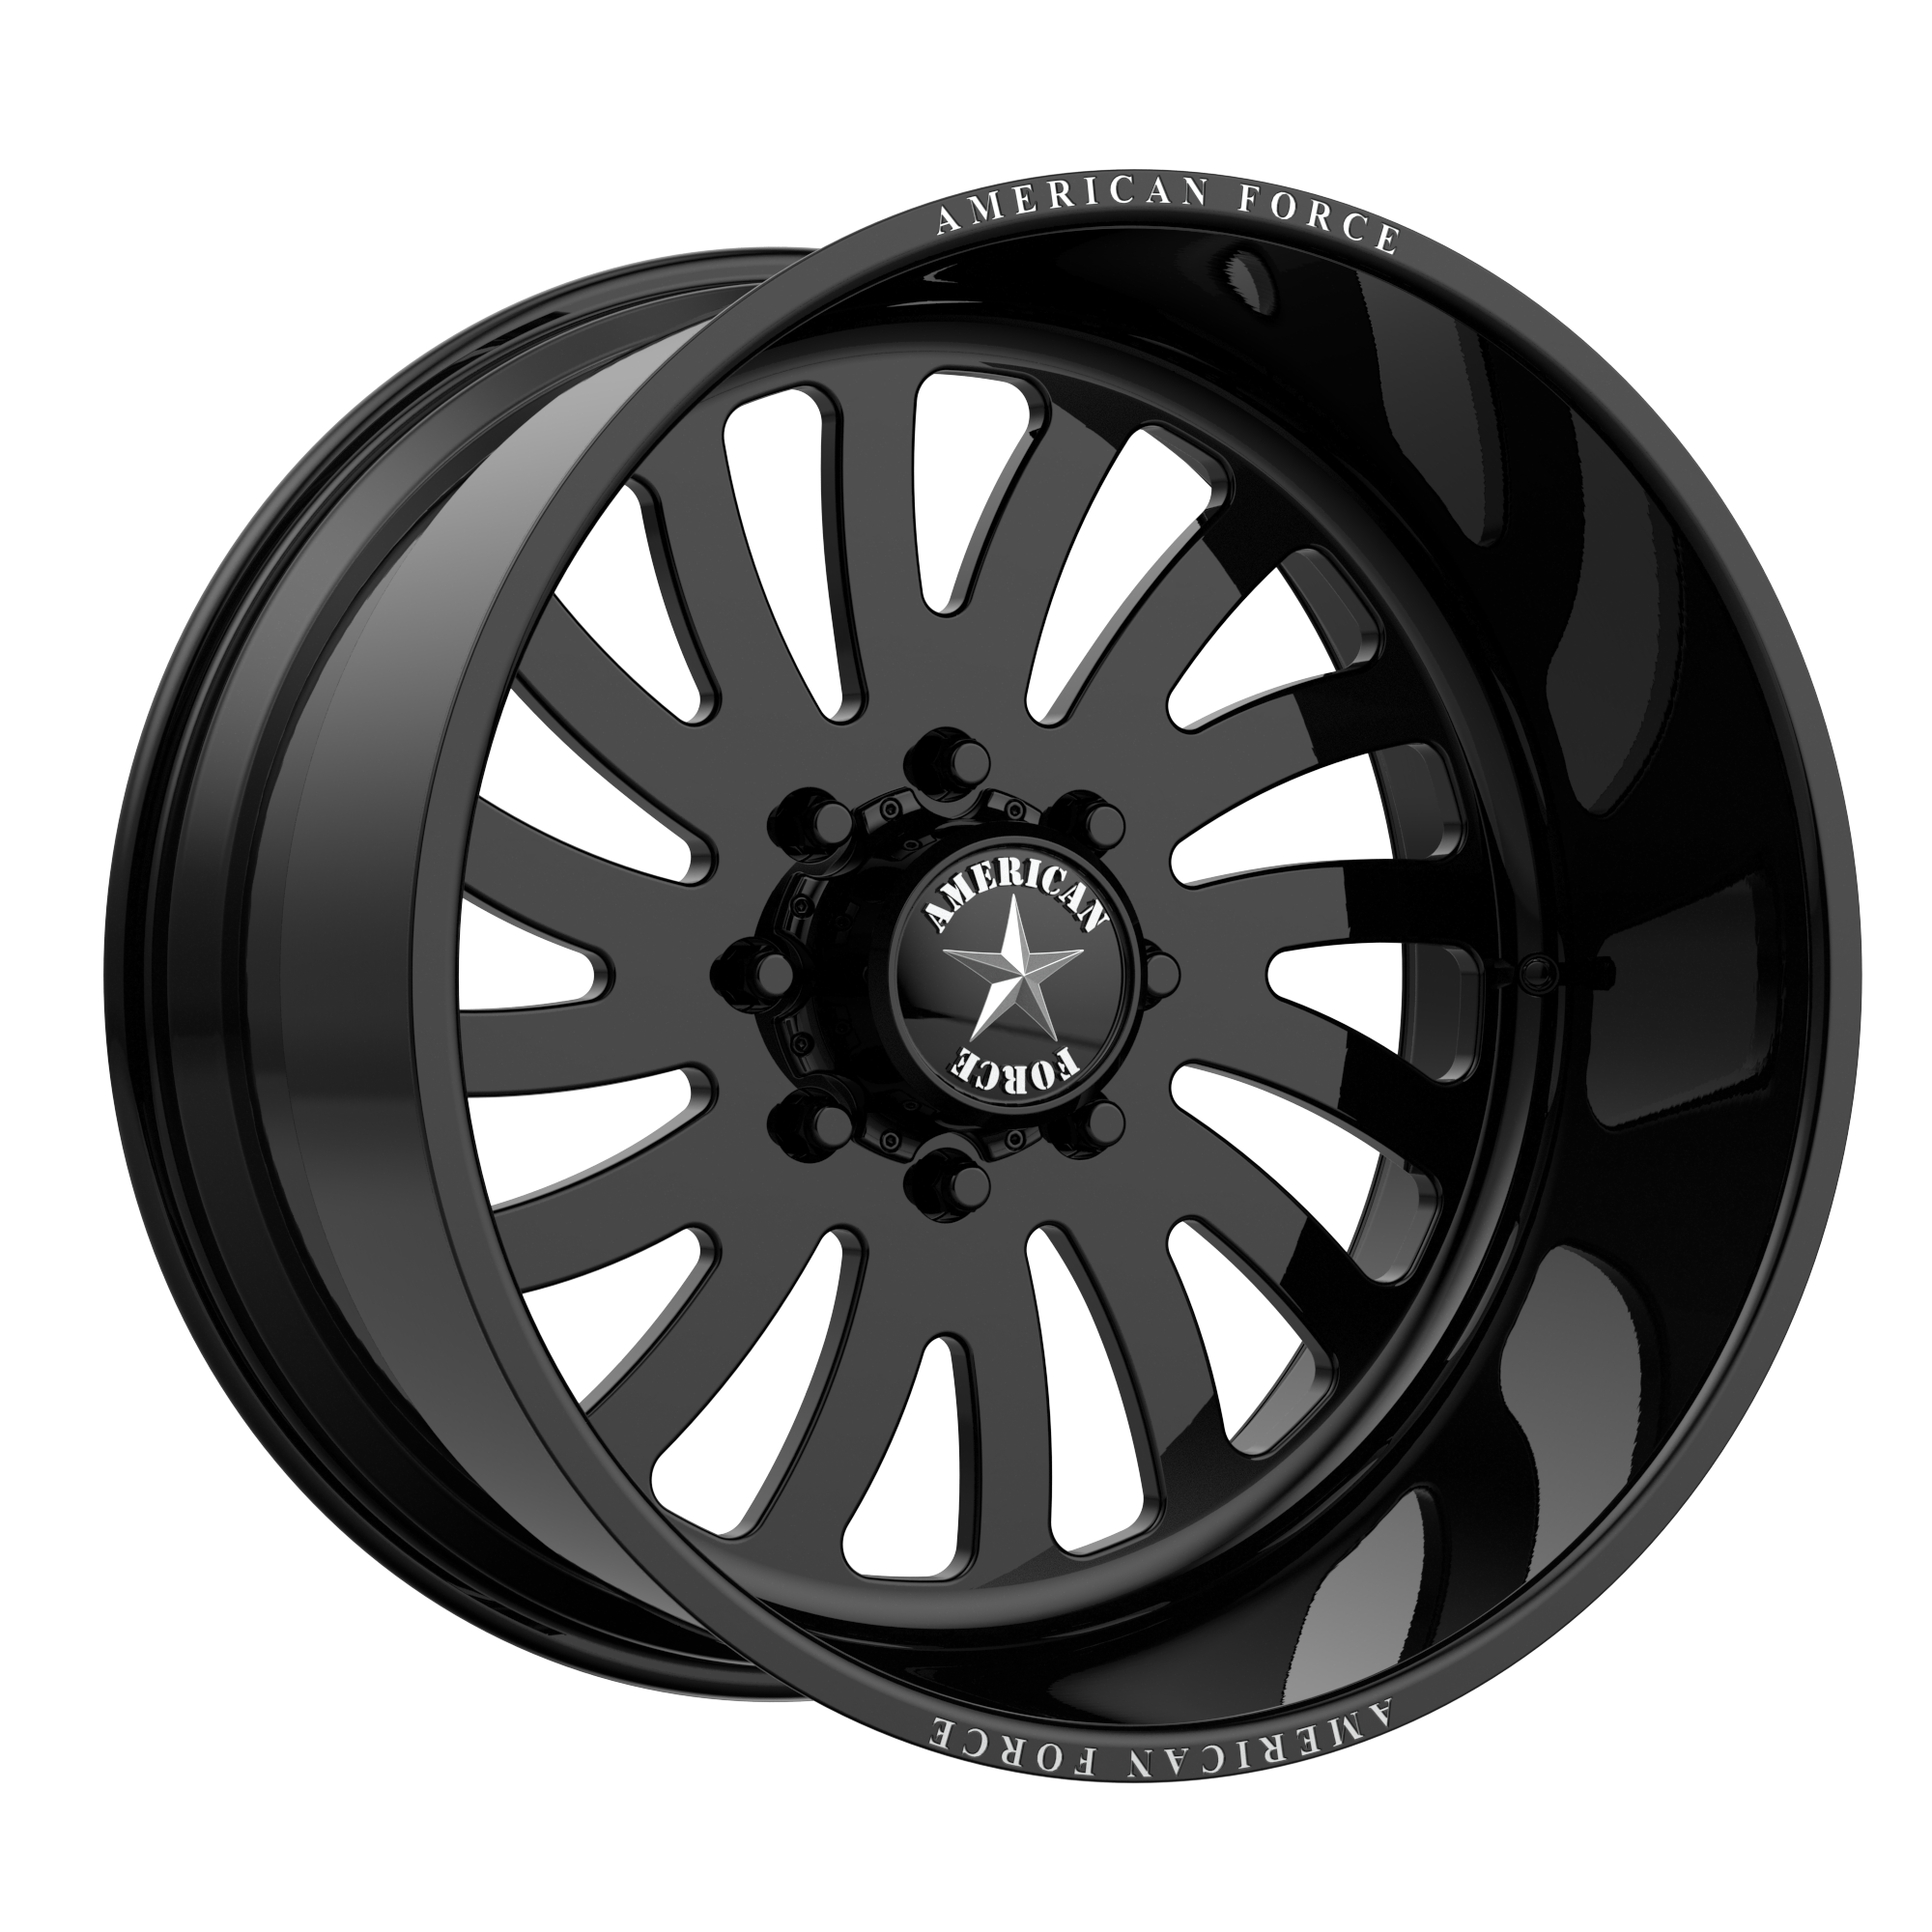 OCTANE SS 22x16 6x135.00 GLOSS BLACK MACHINED (-99 mm) - Tires and Engine Performance